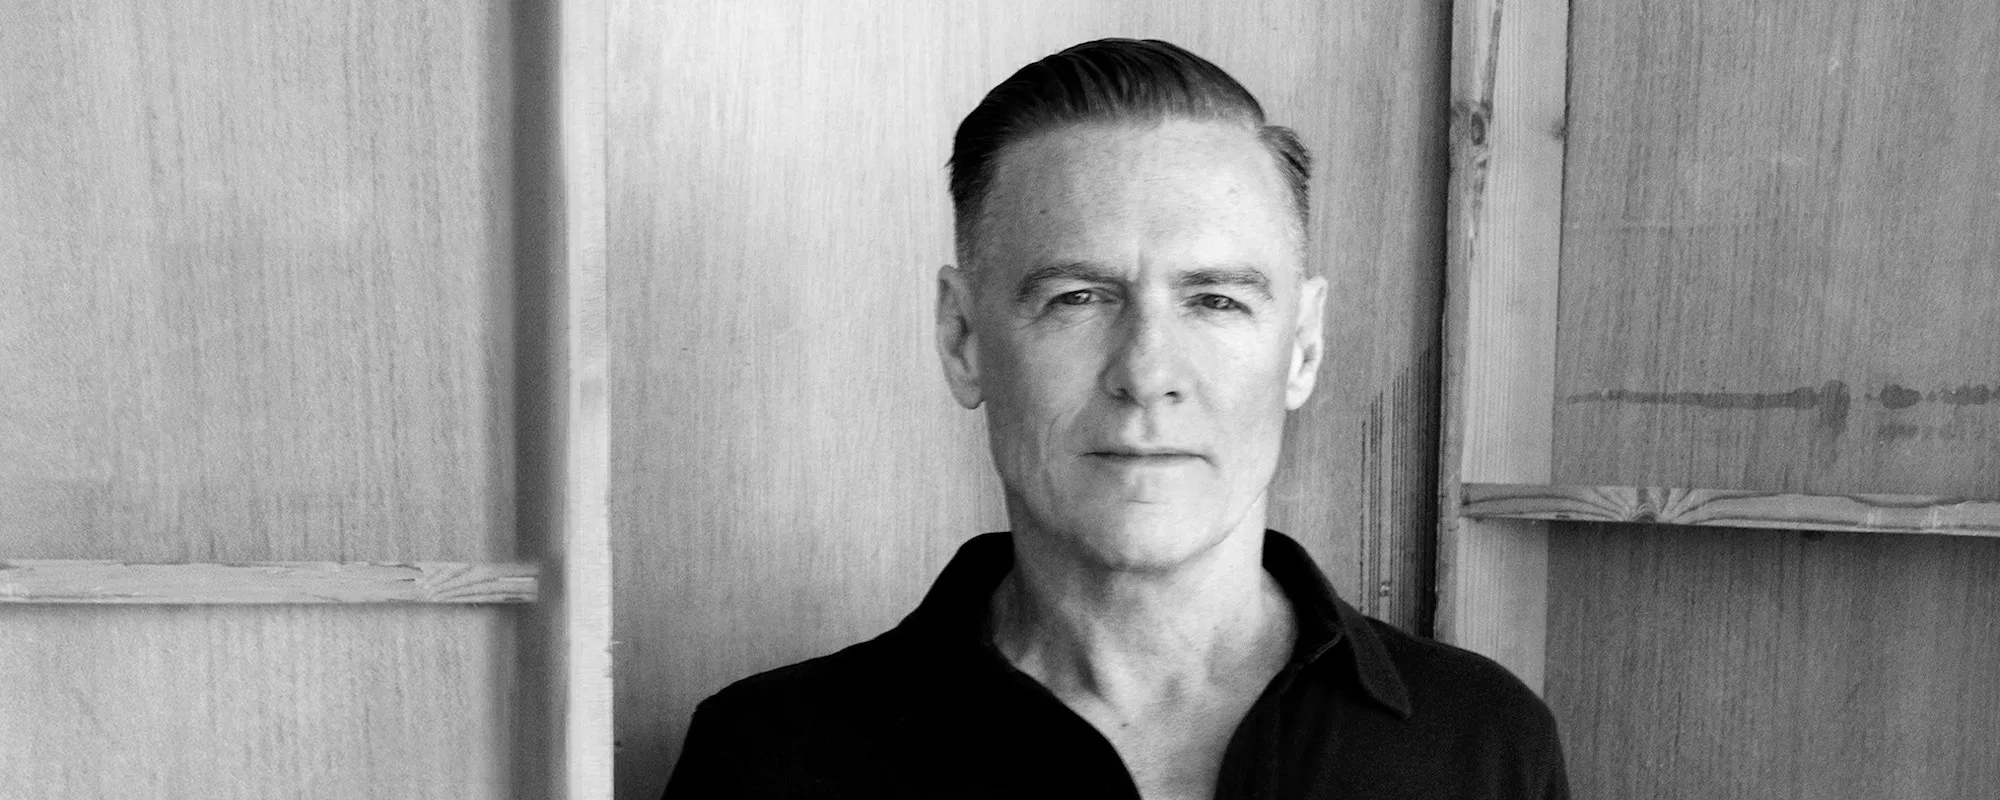 Bryan Adams is Ready to Make Movies